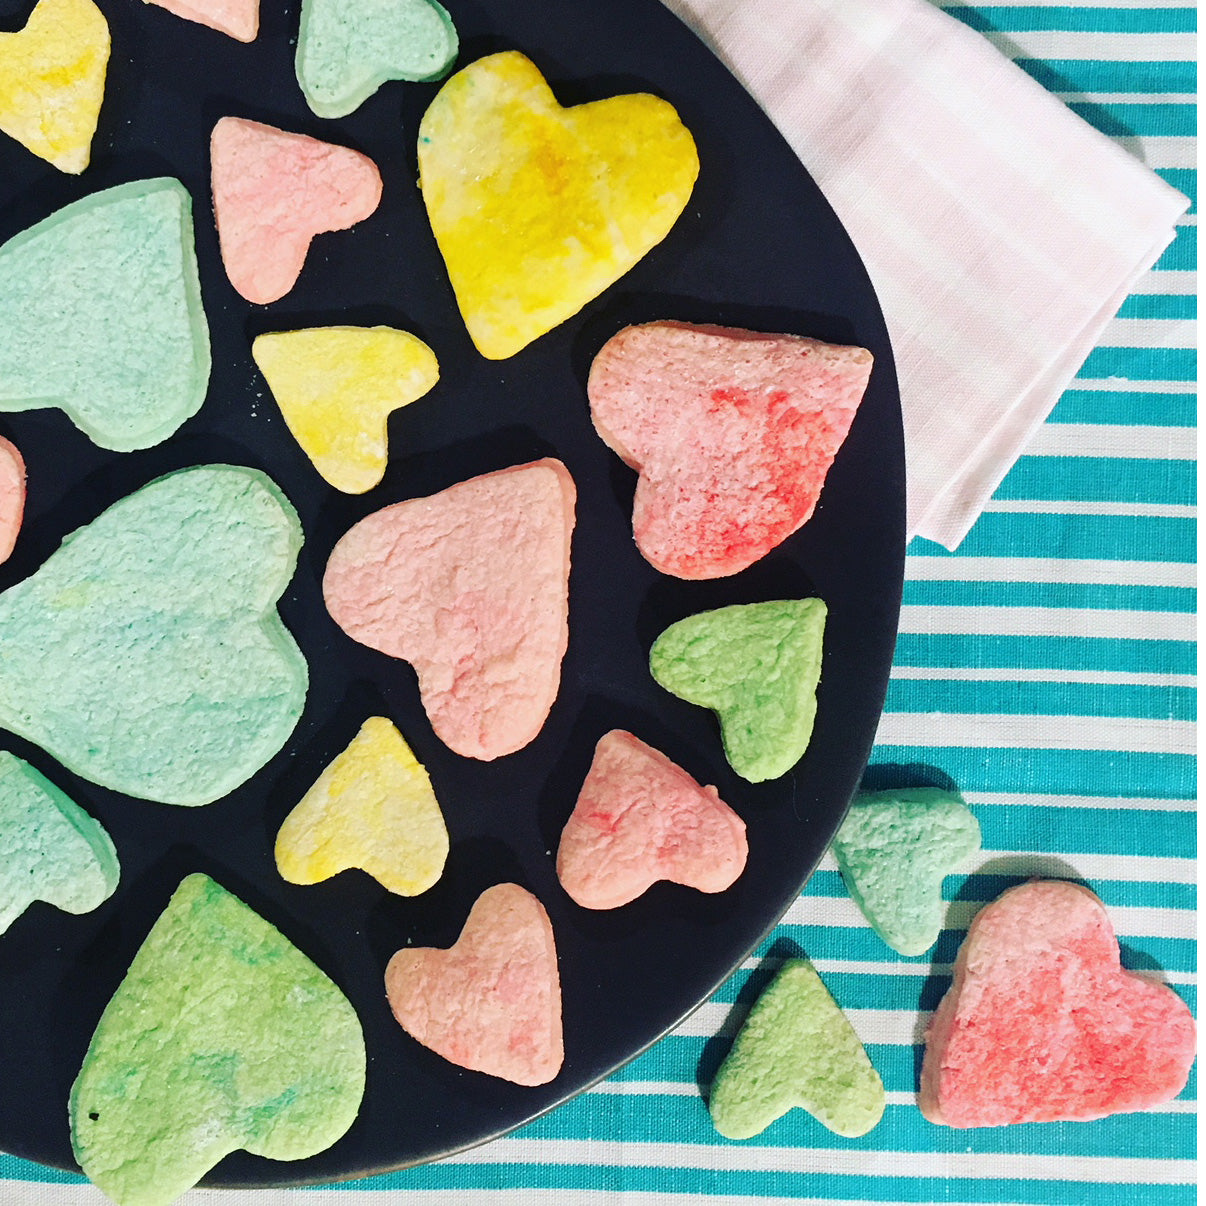 Sweet Heart Coloured Short Bread Cookie Recipe with stripe napkins in turquoise and pale pink